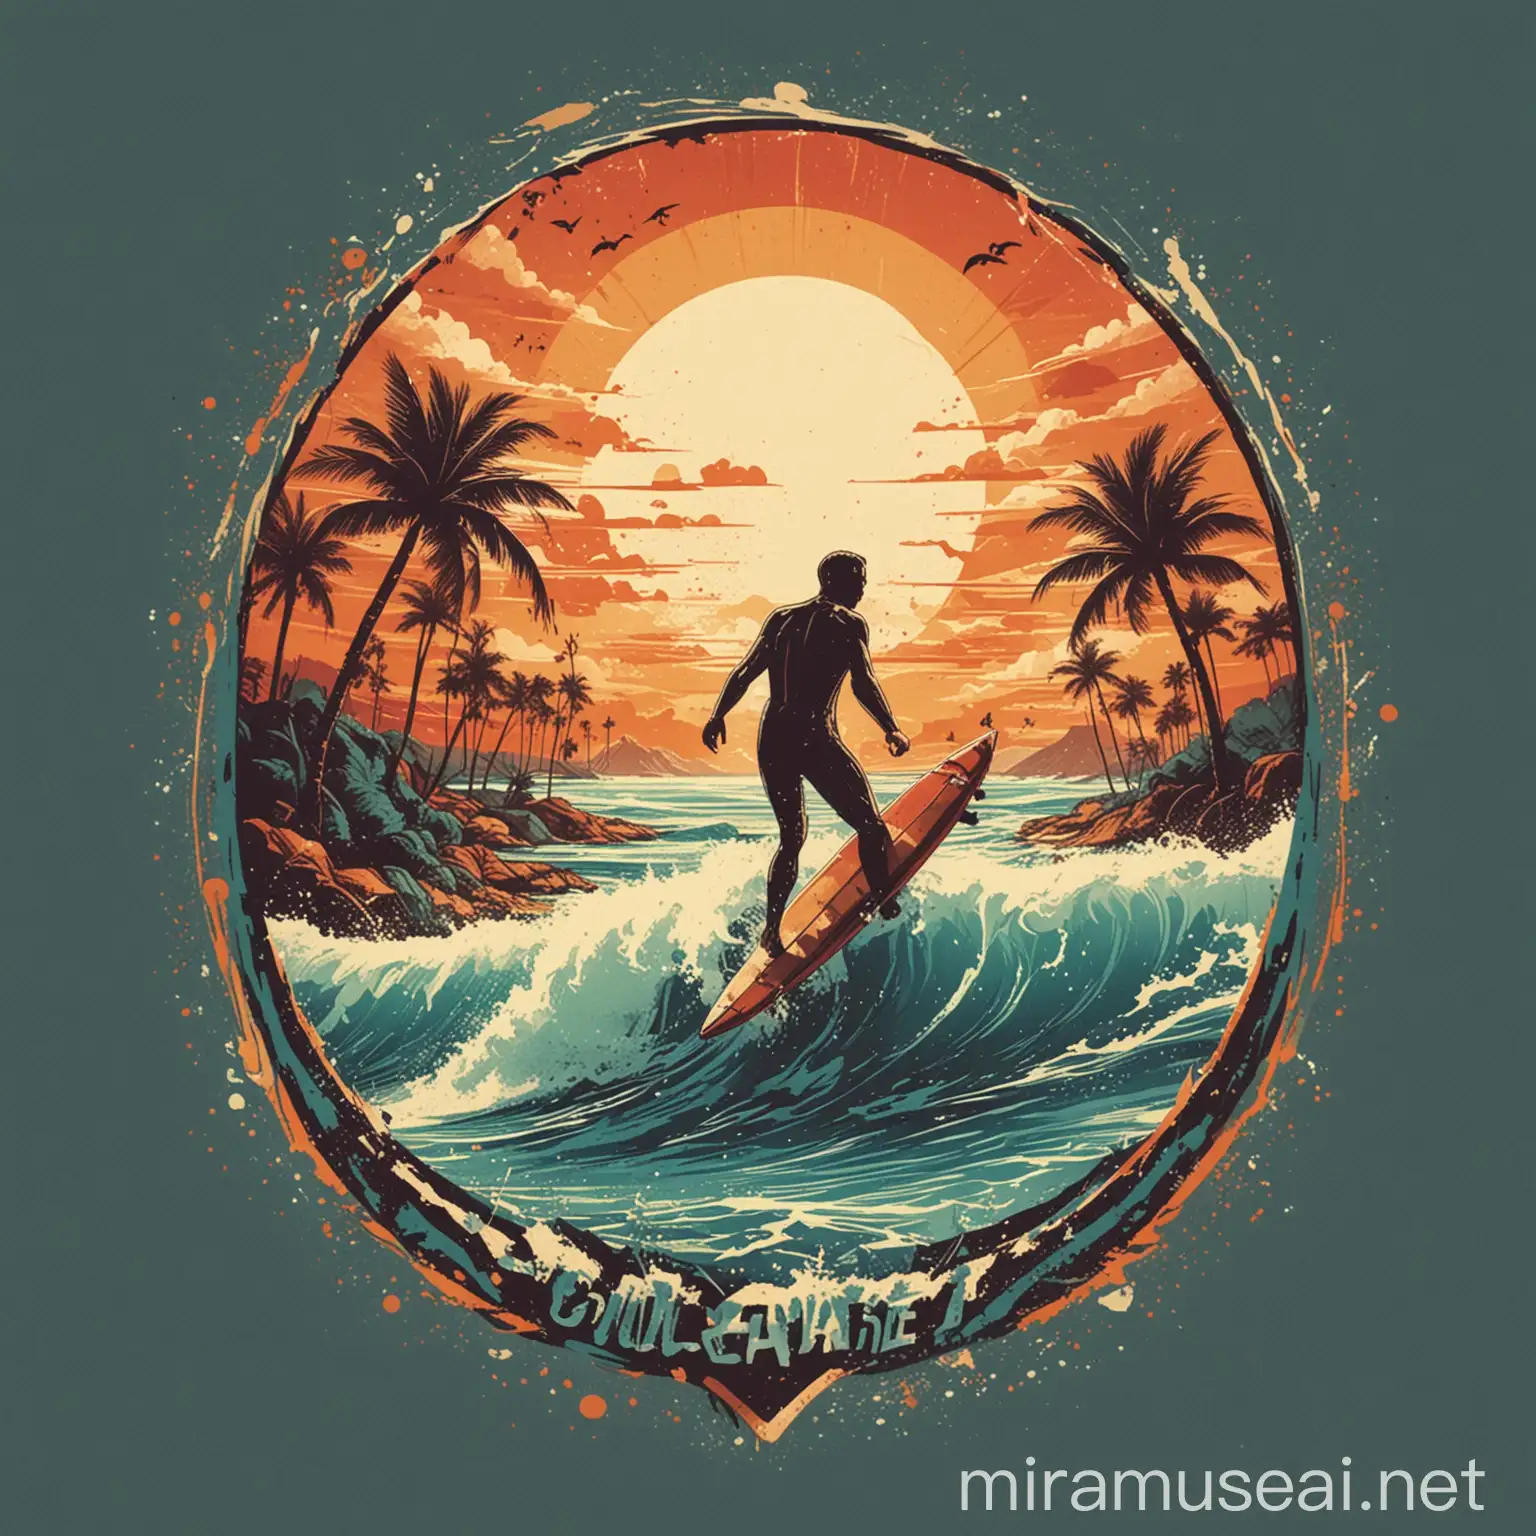 "Create a unique and vibrant illustration of surfing for a t-shirt design. The image should capture the exhilarating essence of surfing through a blend of dynamic waves, a surfer in mid-action, and abstract elements that symbolize freedom and adventure. Integrate a sunset backdrop with rich, warm colors, and use a mix of geometric shapes and flowing lines to give the design a modern, artistic twist. Incorporate elements such as a surfboard, palm trees, and ocean spray, ensuring the composition is balanced and eye-catching. The overall vibe should be energetic and inspiring, evoking the thrill of riding the waves and the beauty of the ocean."